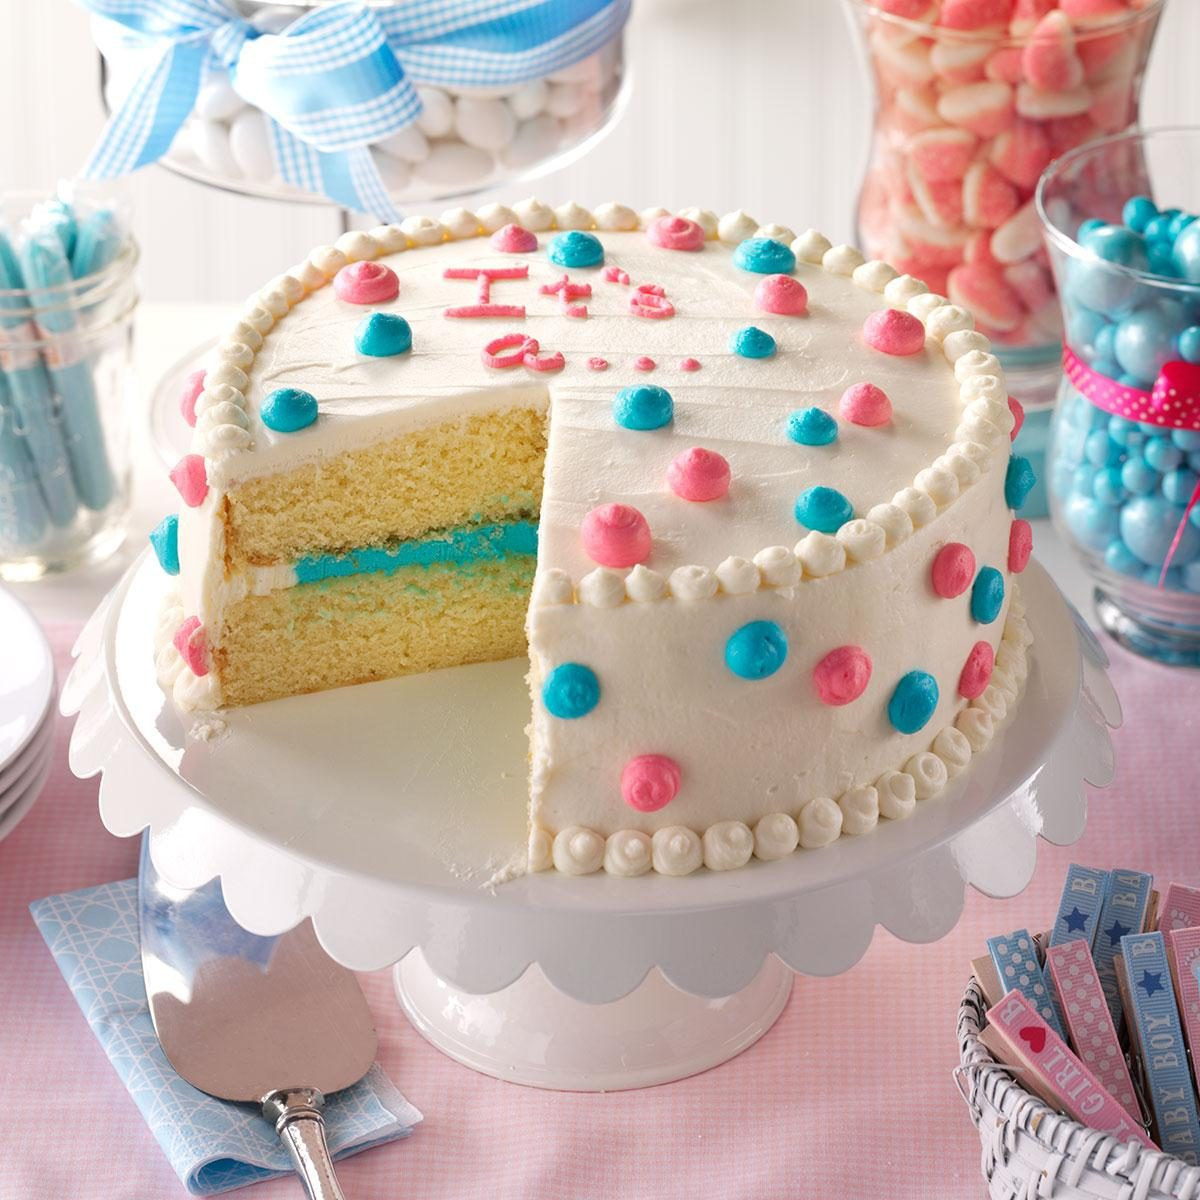 Reveal Party Food Ideas
 The Cutest Gender Reveal Party Food Ideas